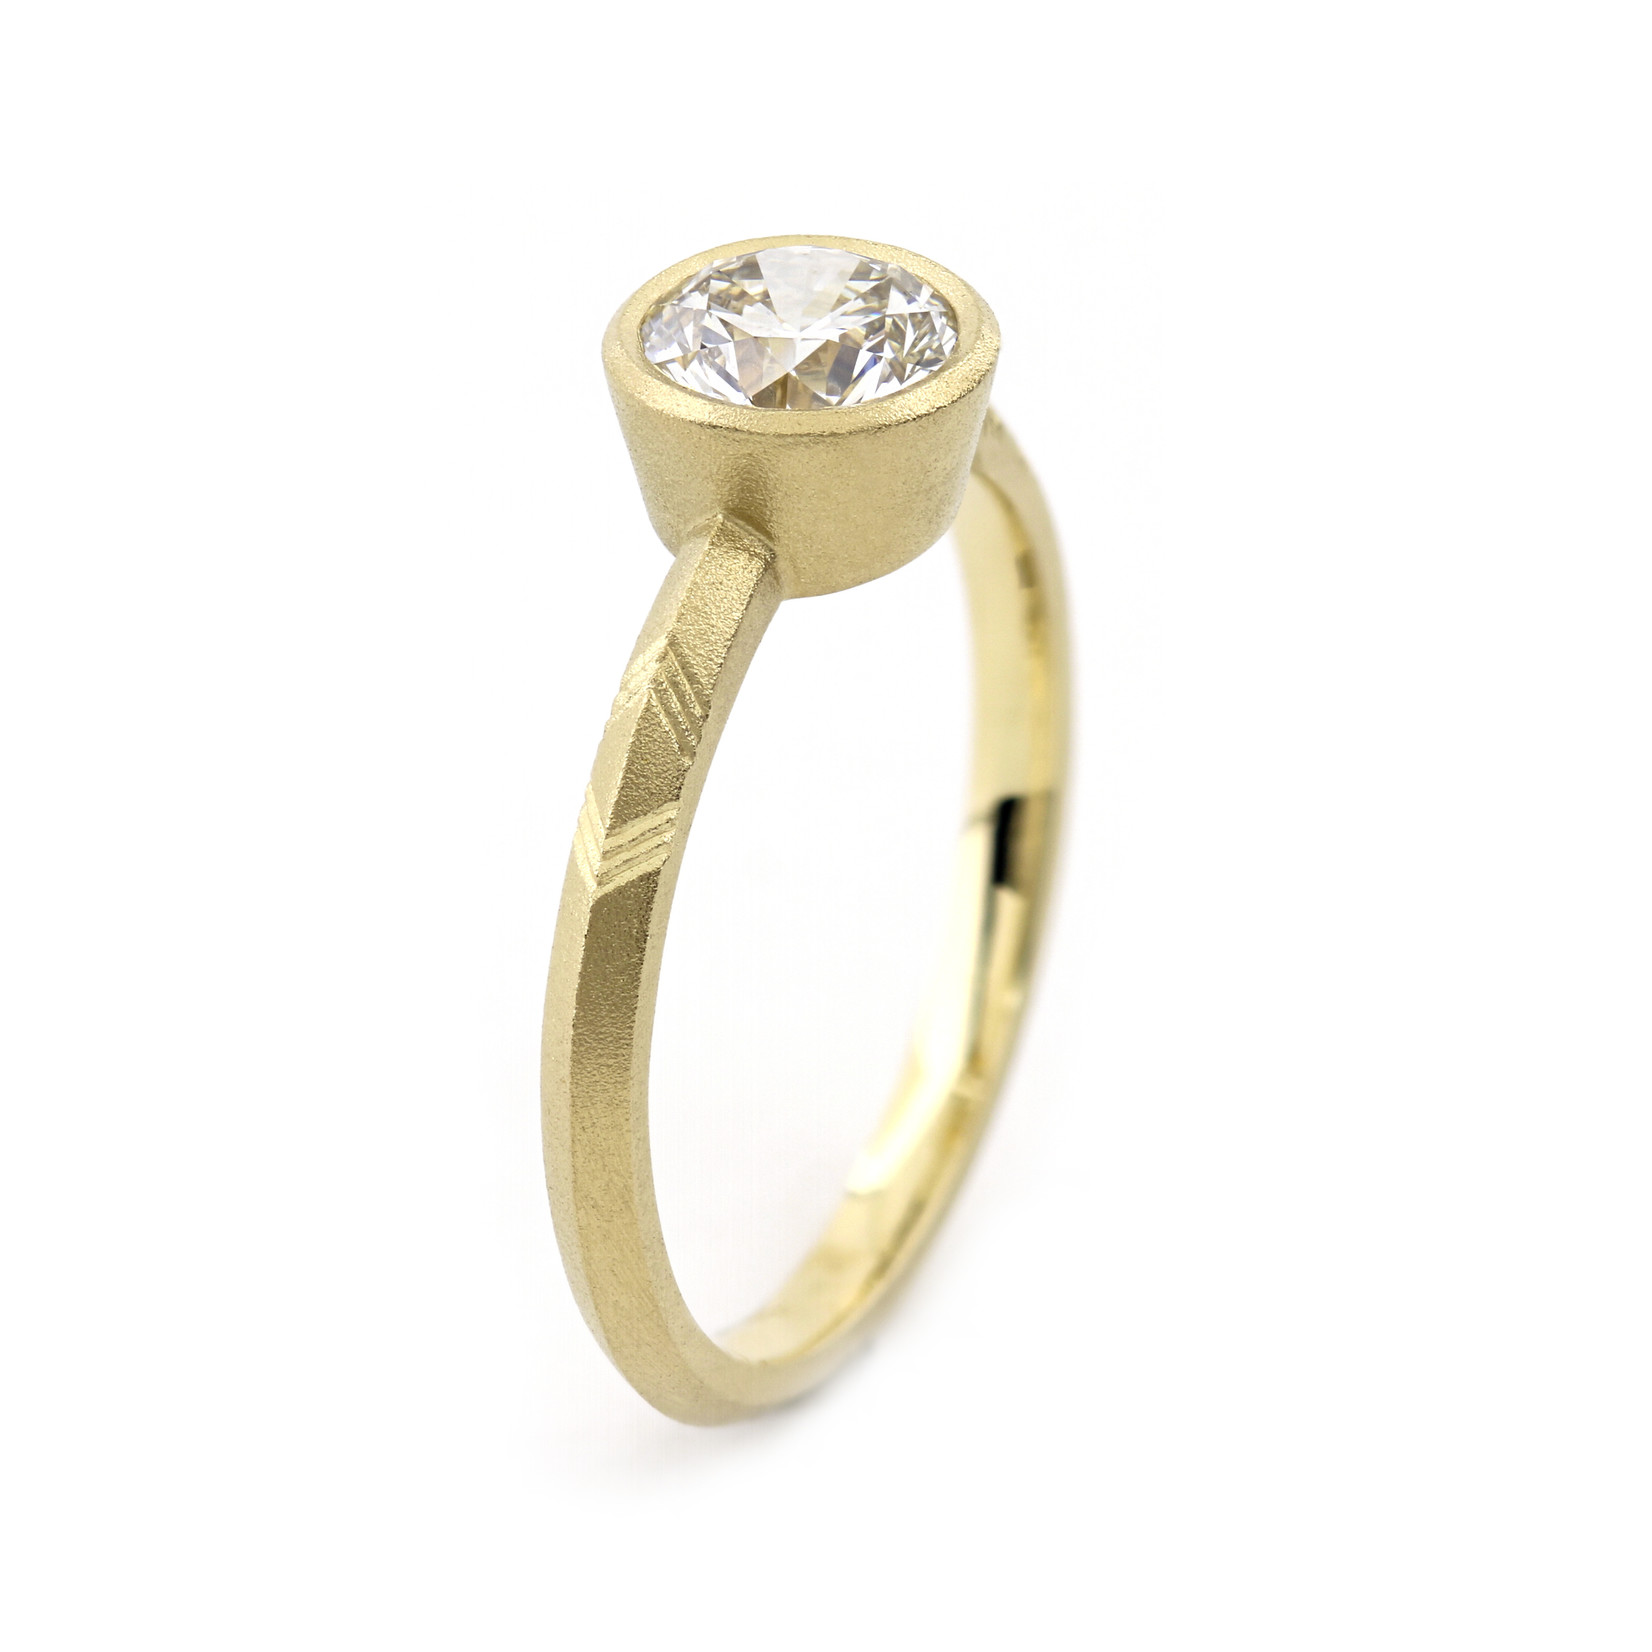 Baxter Moerman Shelby Ring with Diamond